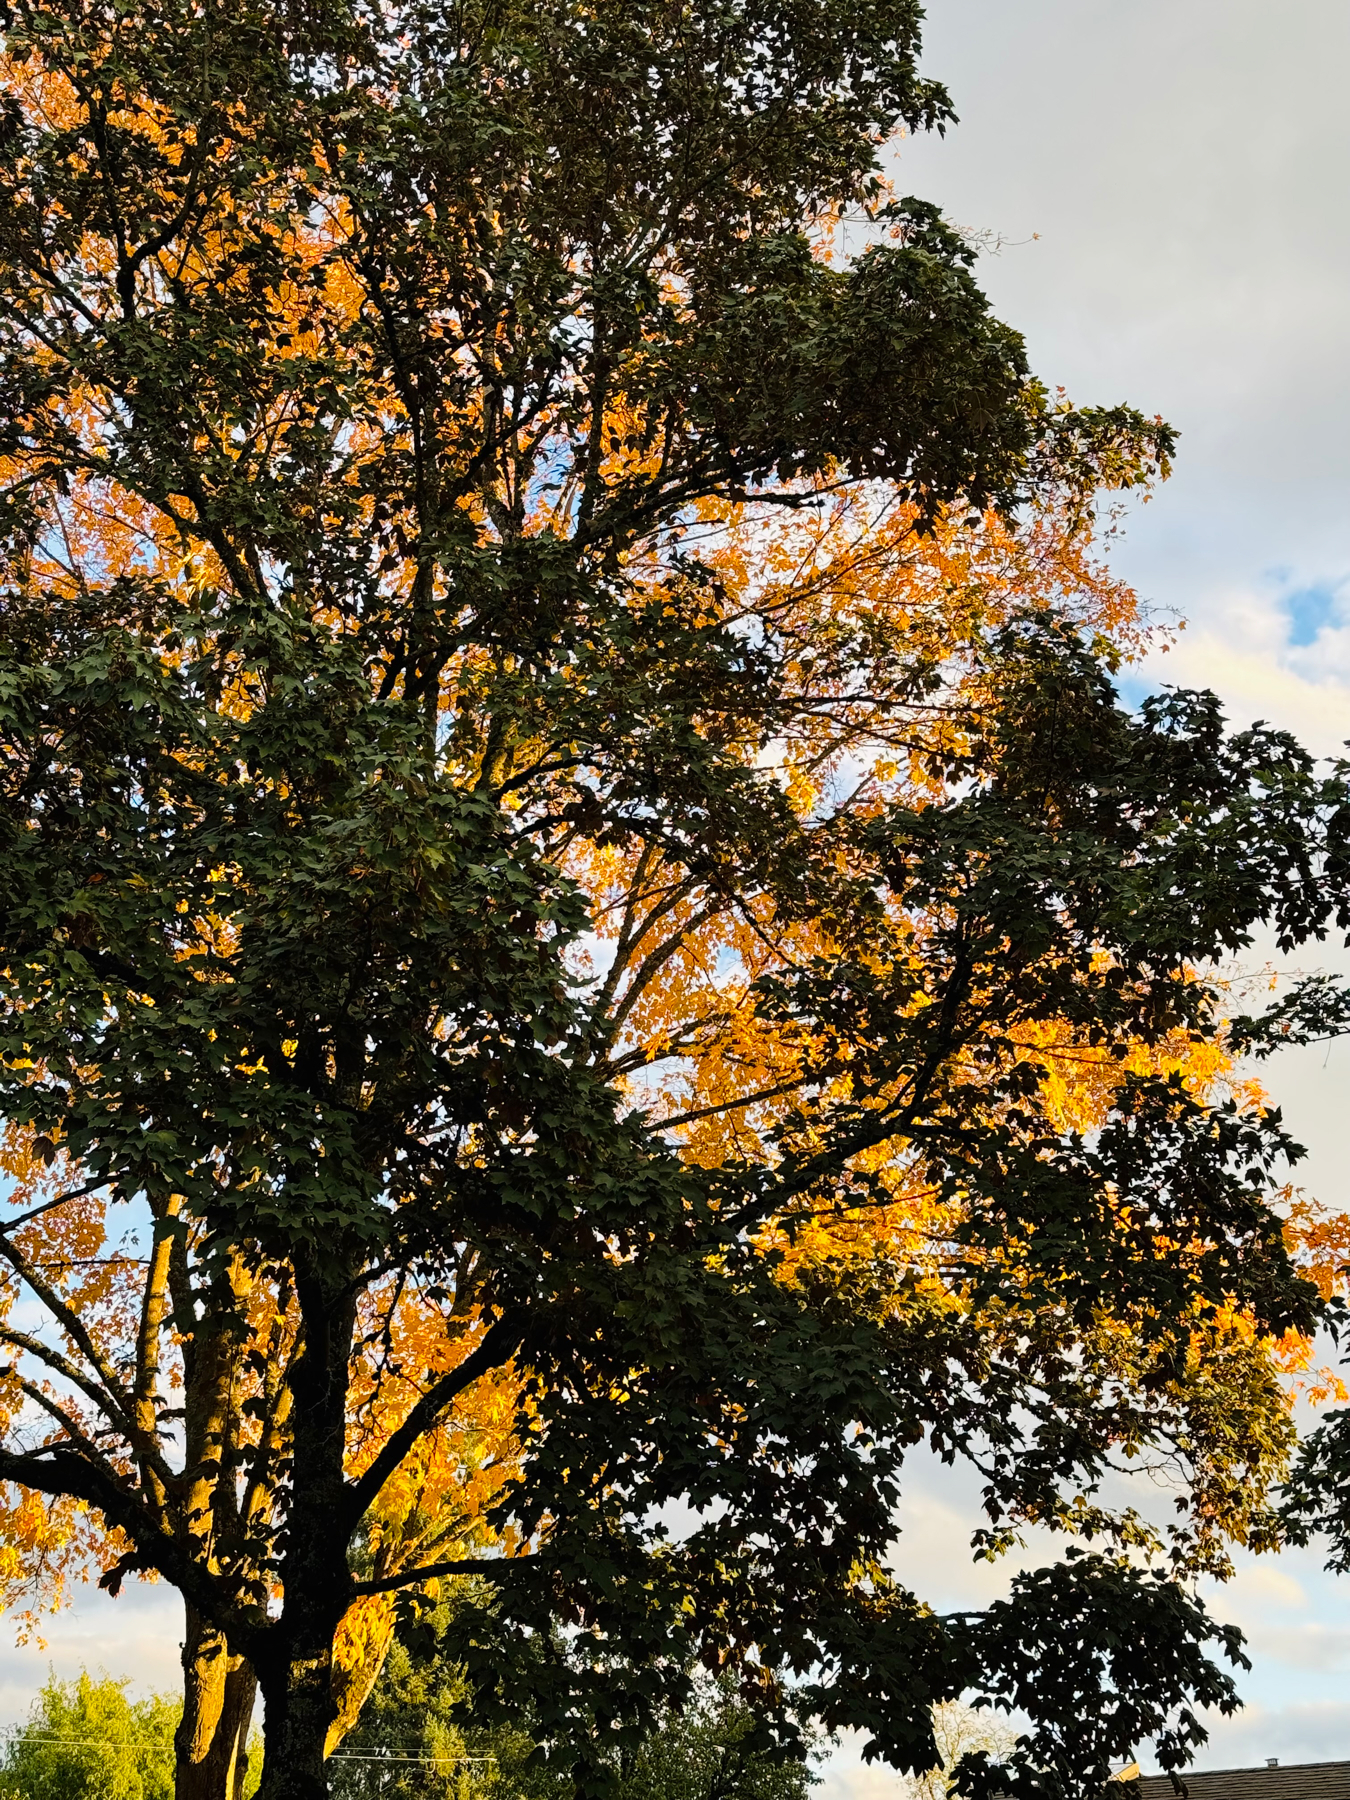 Two tree with contrasting yellow and dark green leaves.